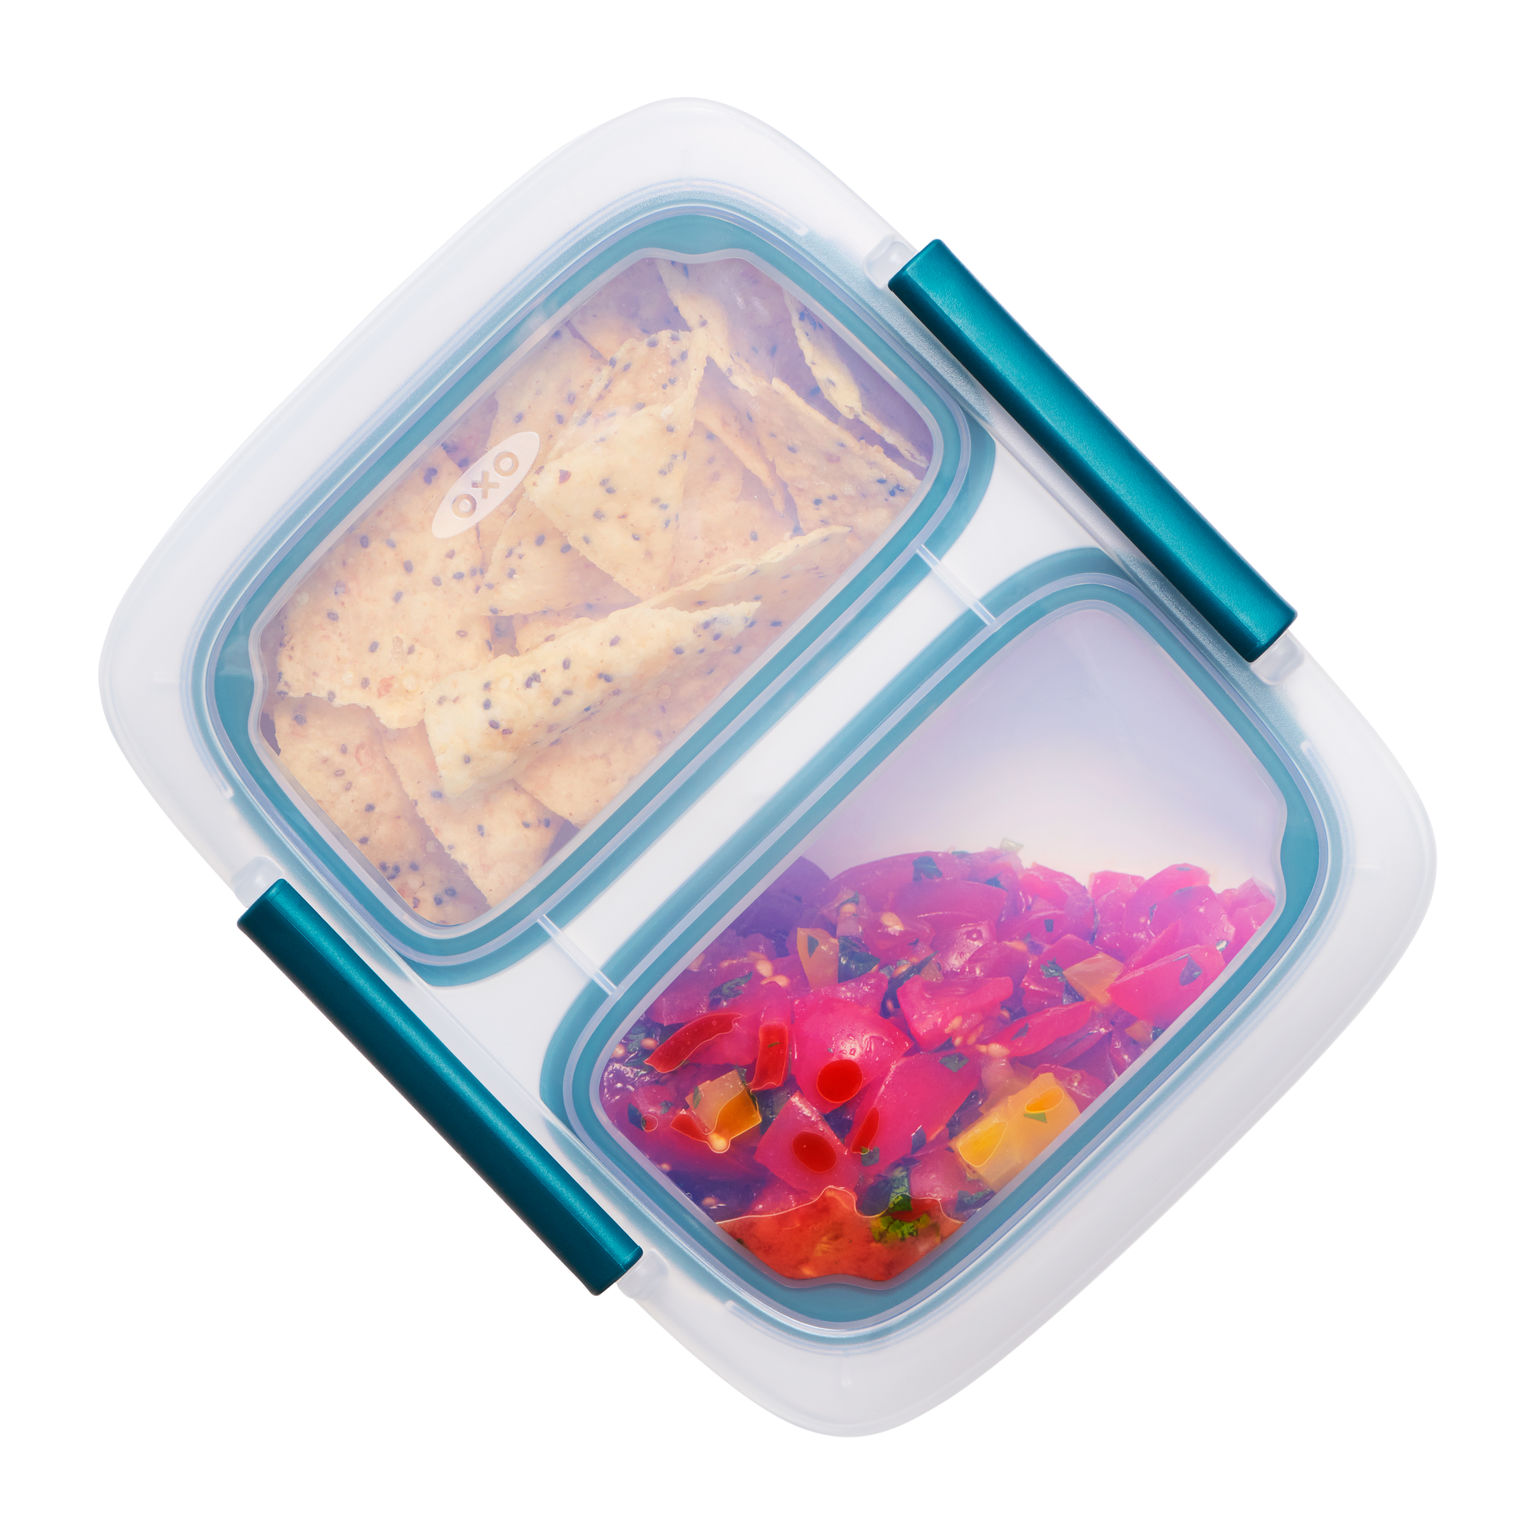 OXO Prep & Go Leakproof Containers